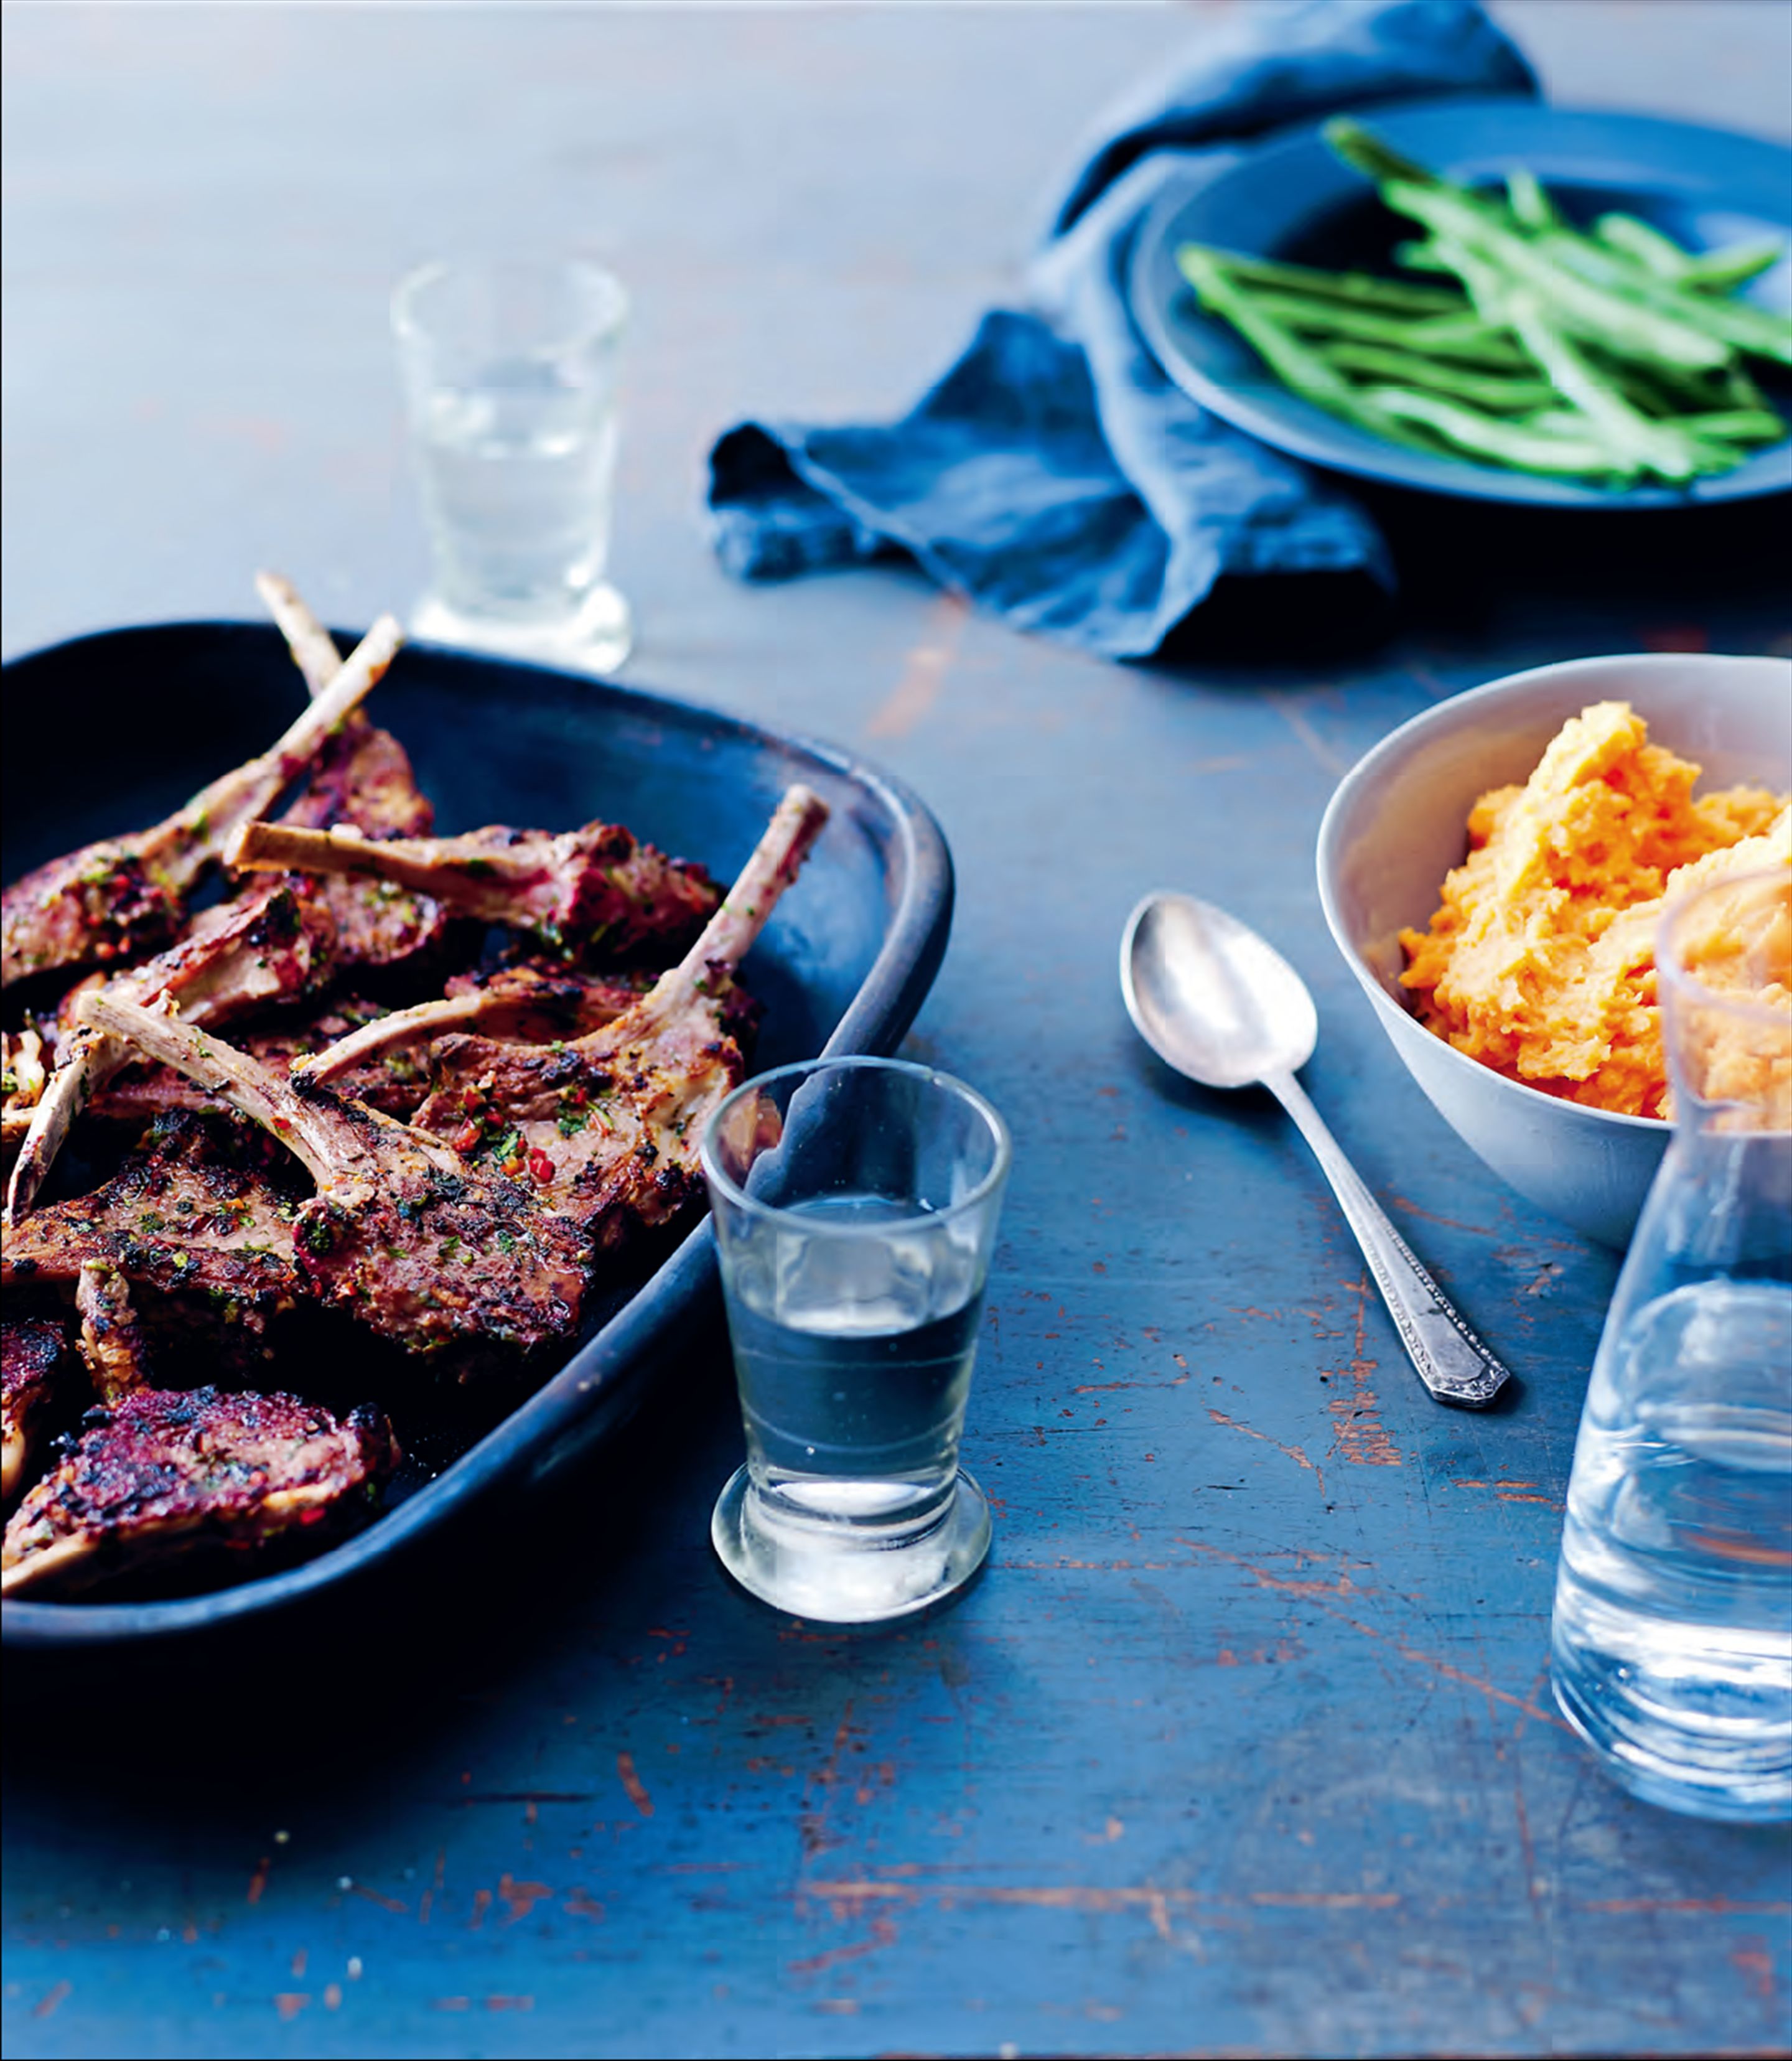 Coriander and chilli-crusted lamb cutlets with sweet potato mash